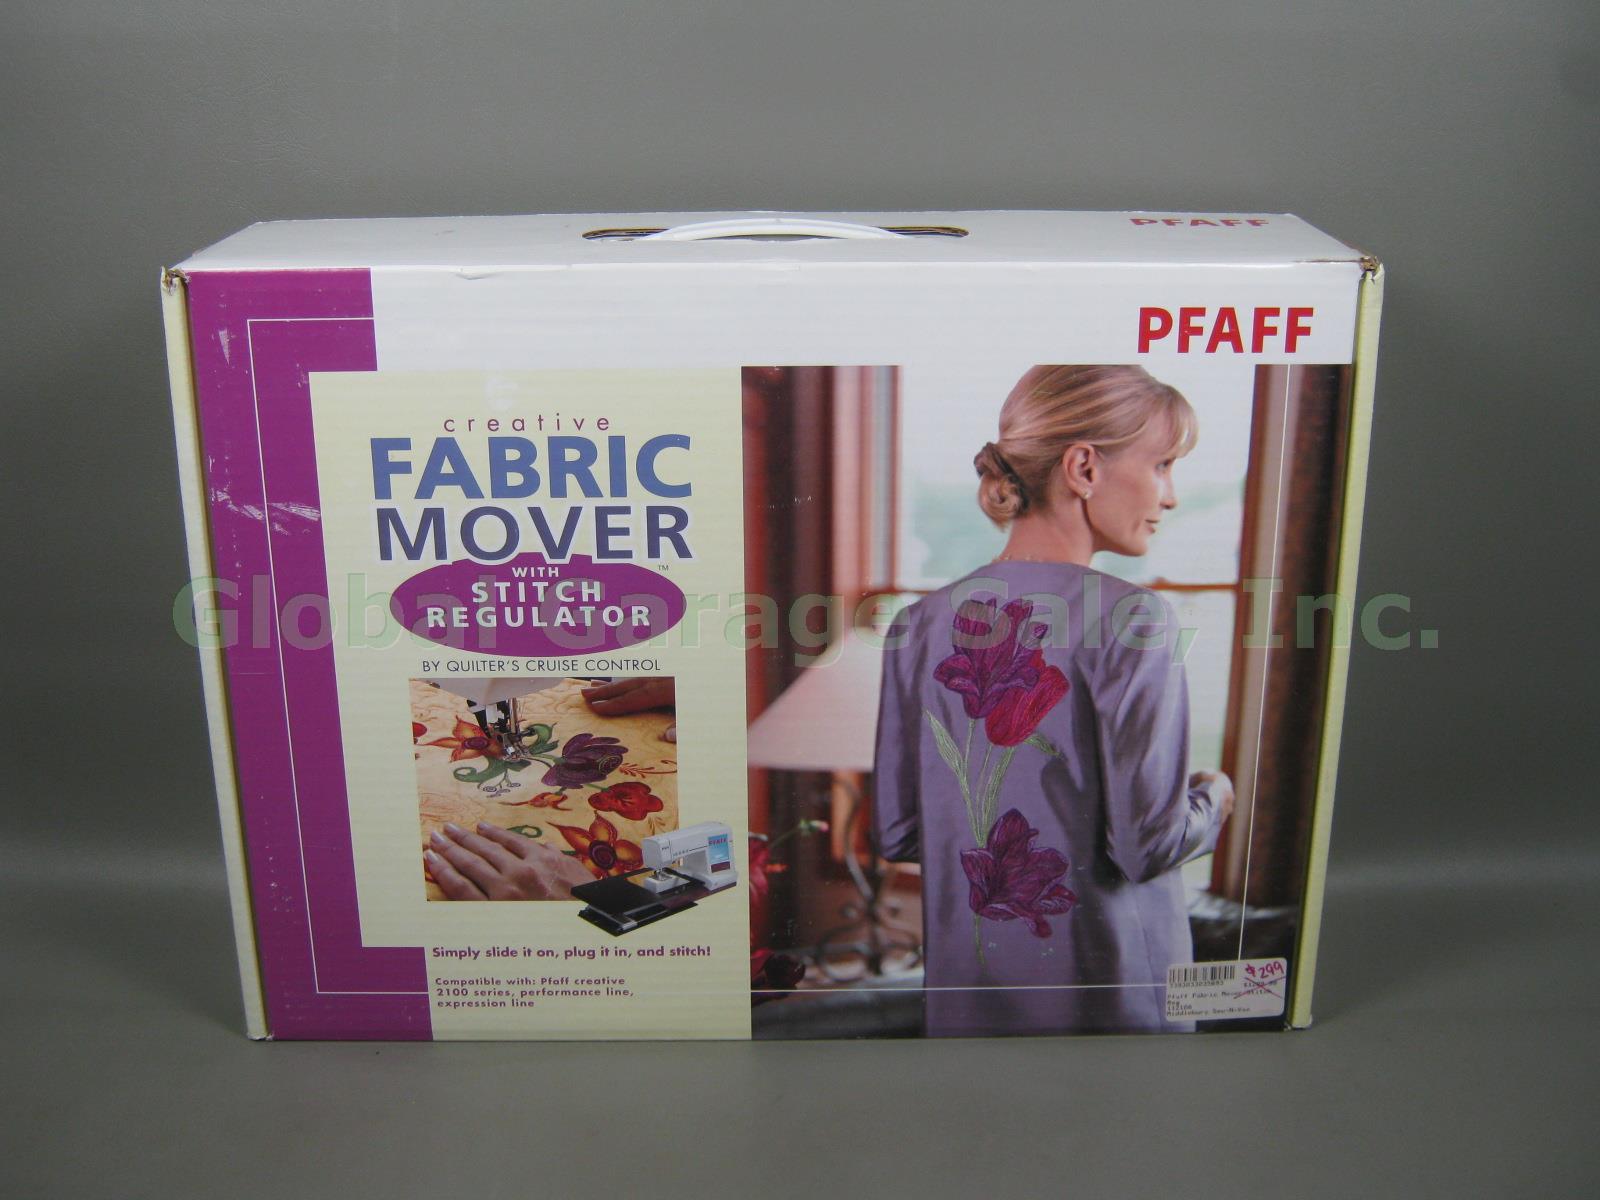 New Pfaff Creative Fabric Mover W/ Stitch Regulator By Quilter